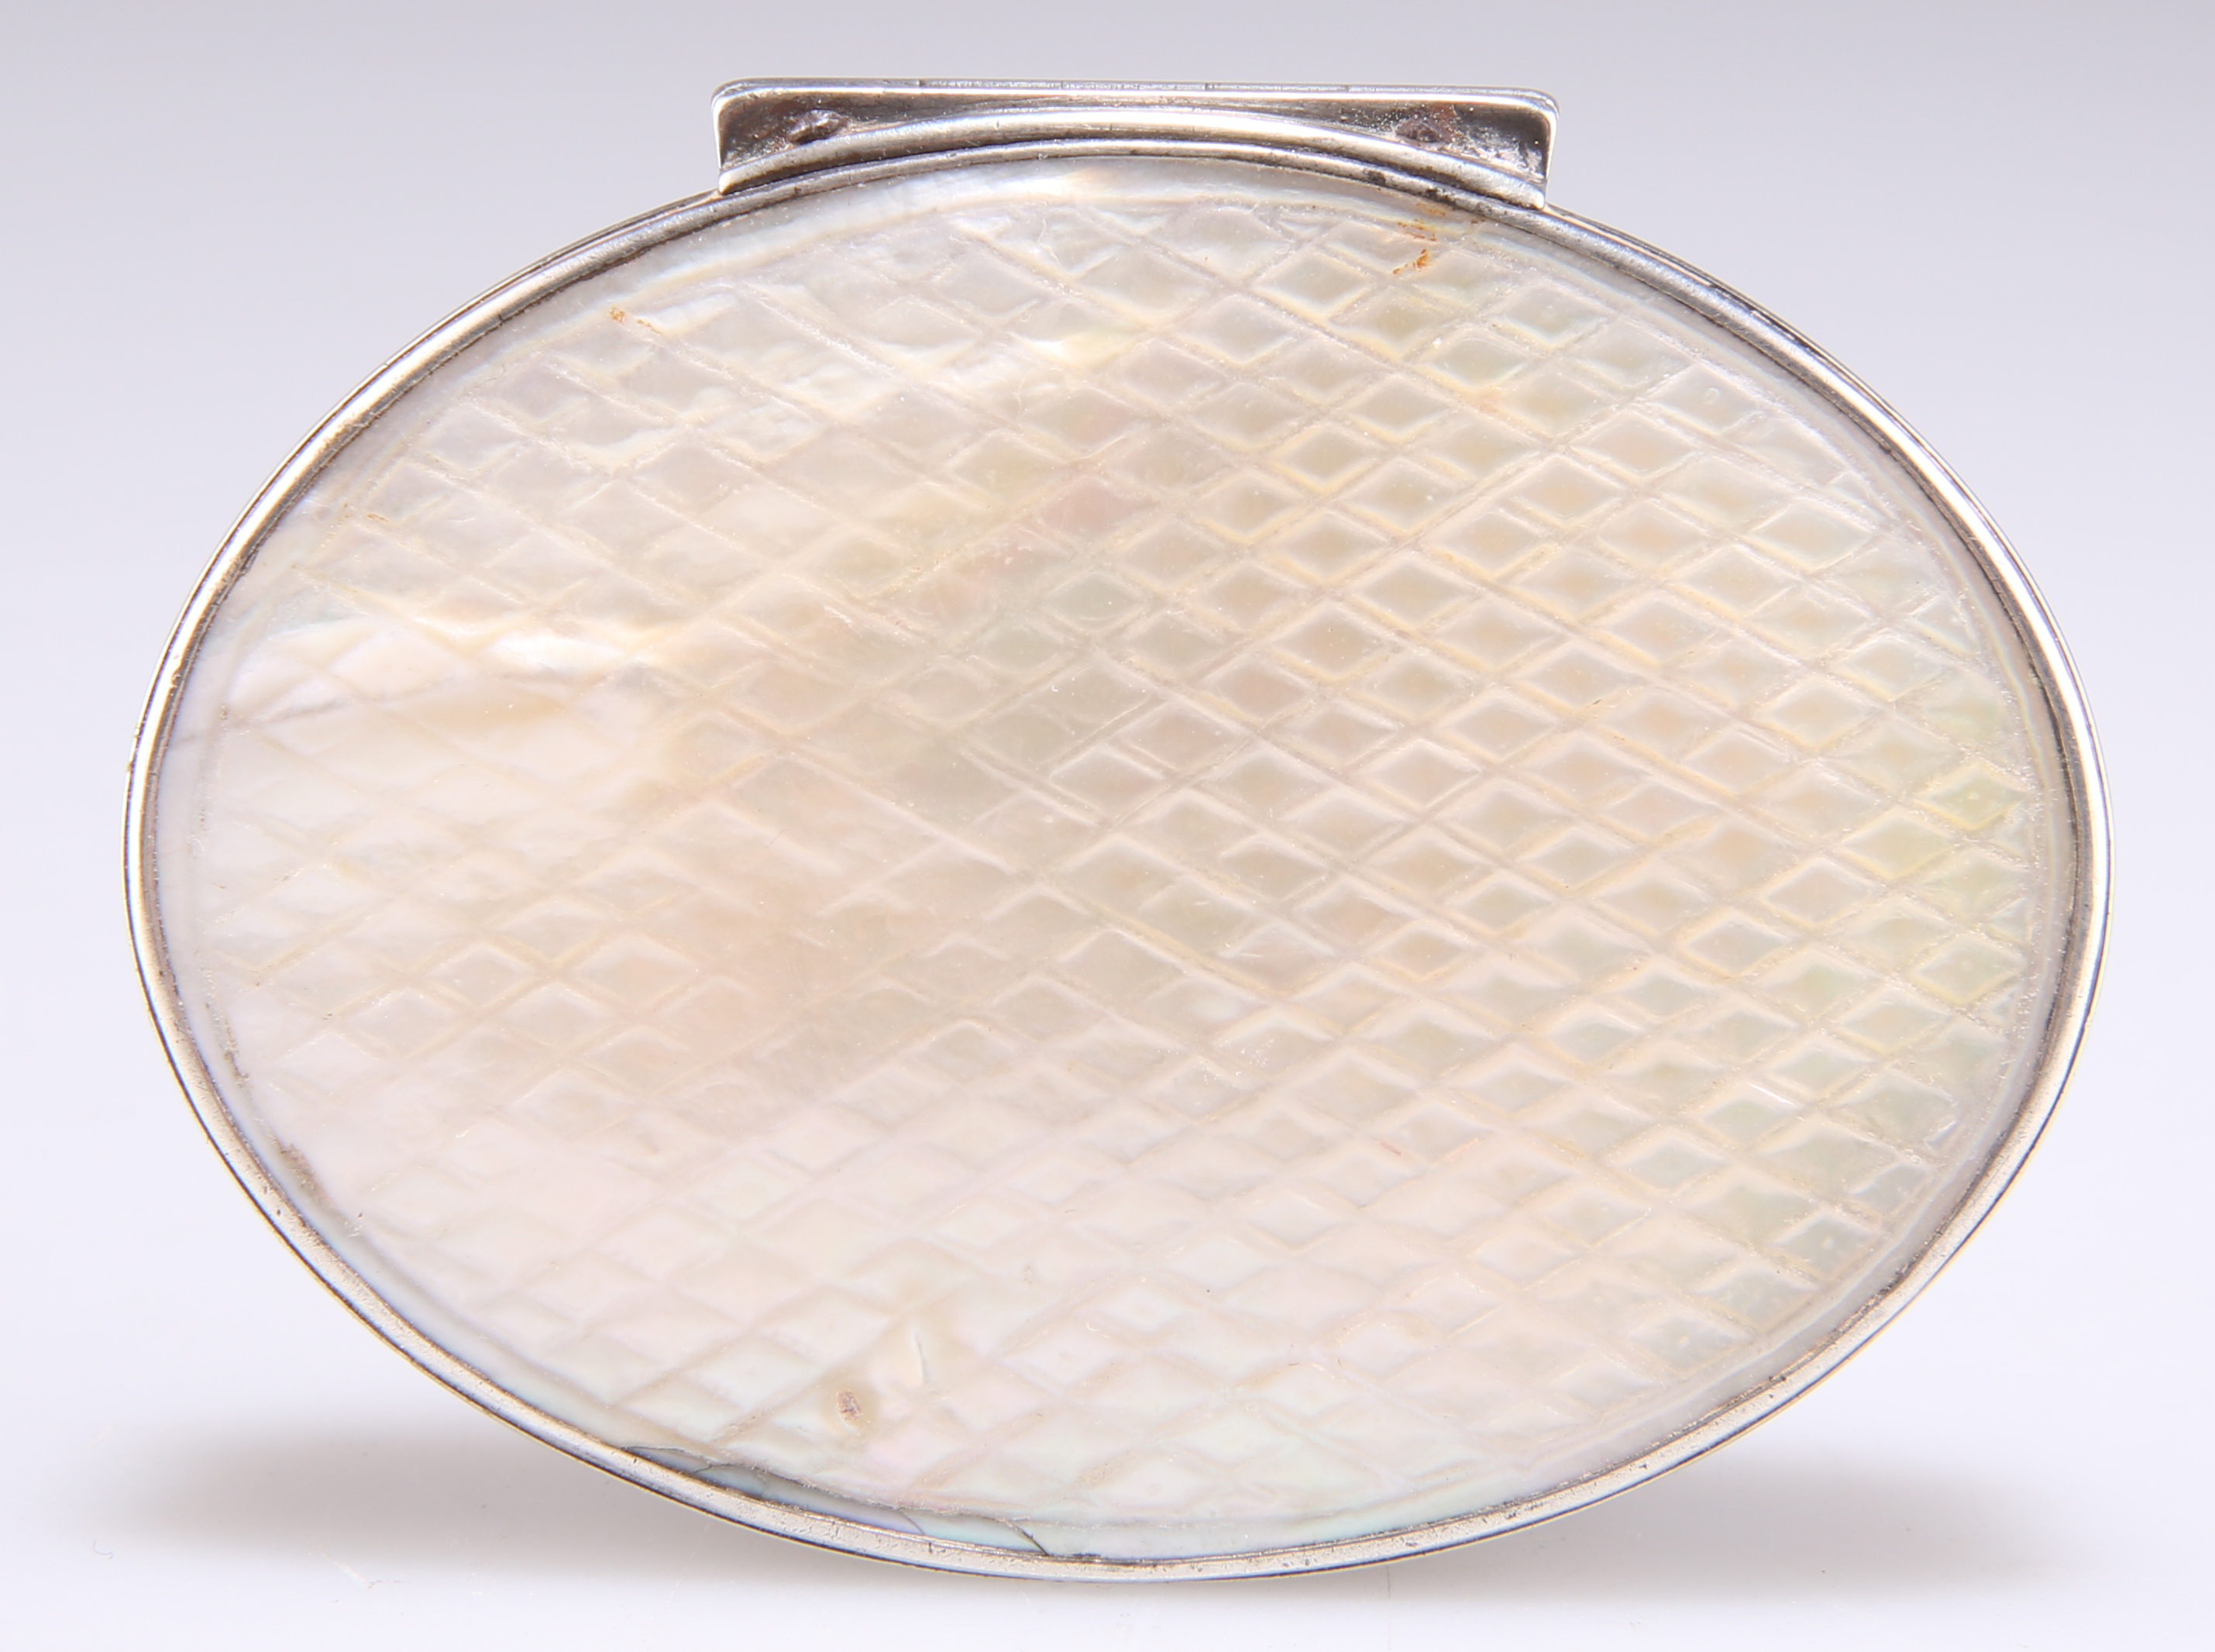 AN EARLY 18TH CENTURY SILVER AND MOTHER-OF-PEARL SNUFF BOX